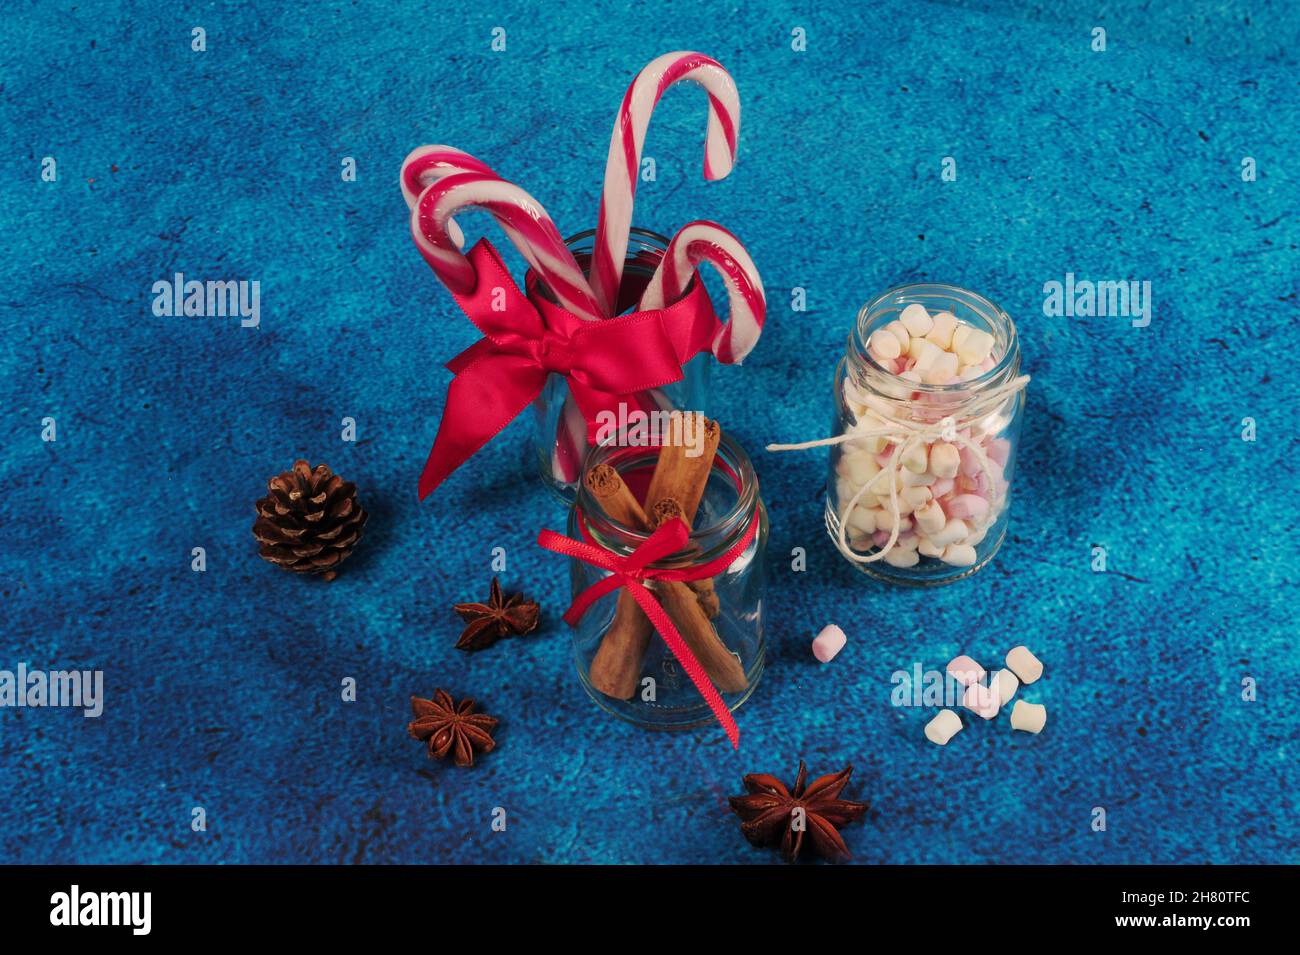 Top view of Christmas sweets. decorated glass jars with marshmallows on a blue surface Stock Photo